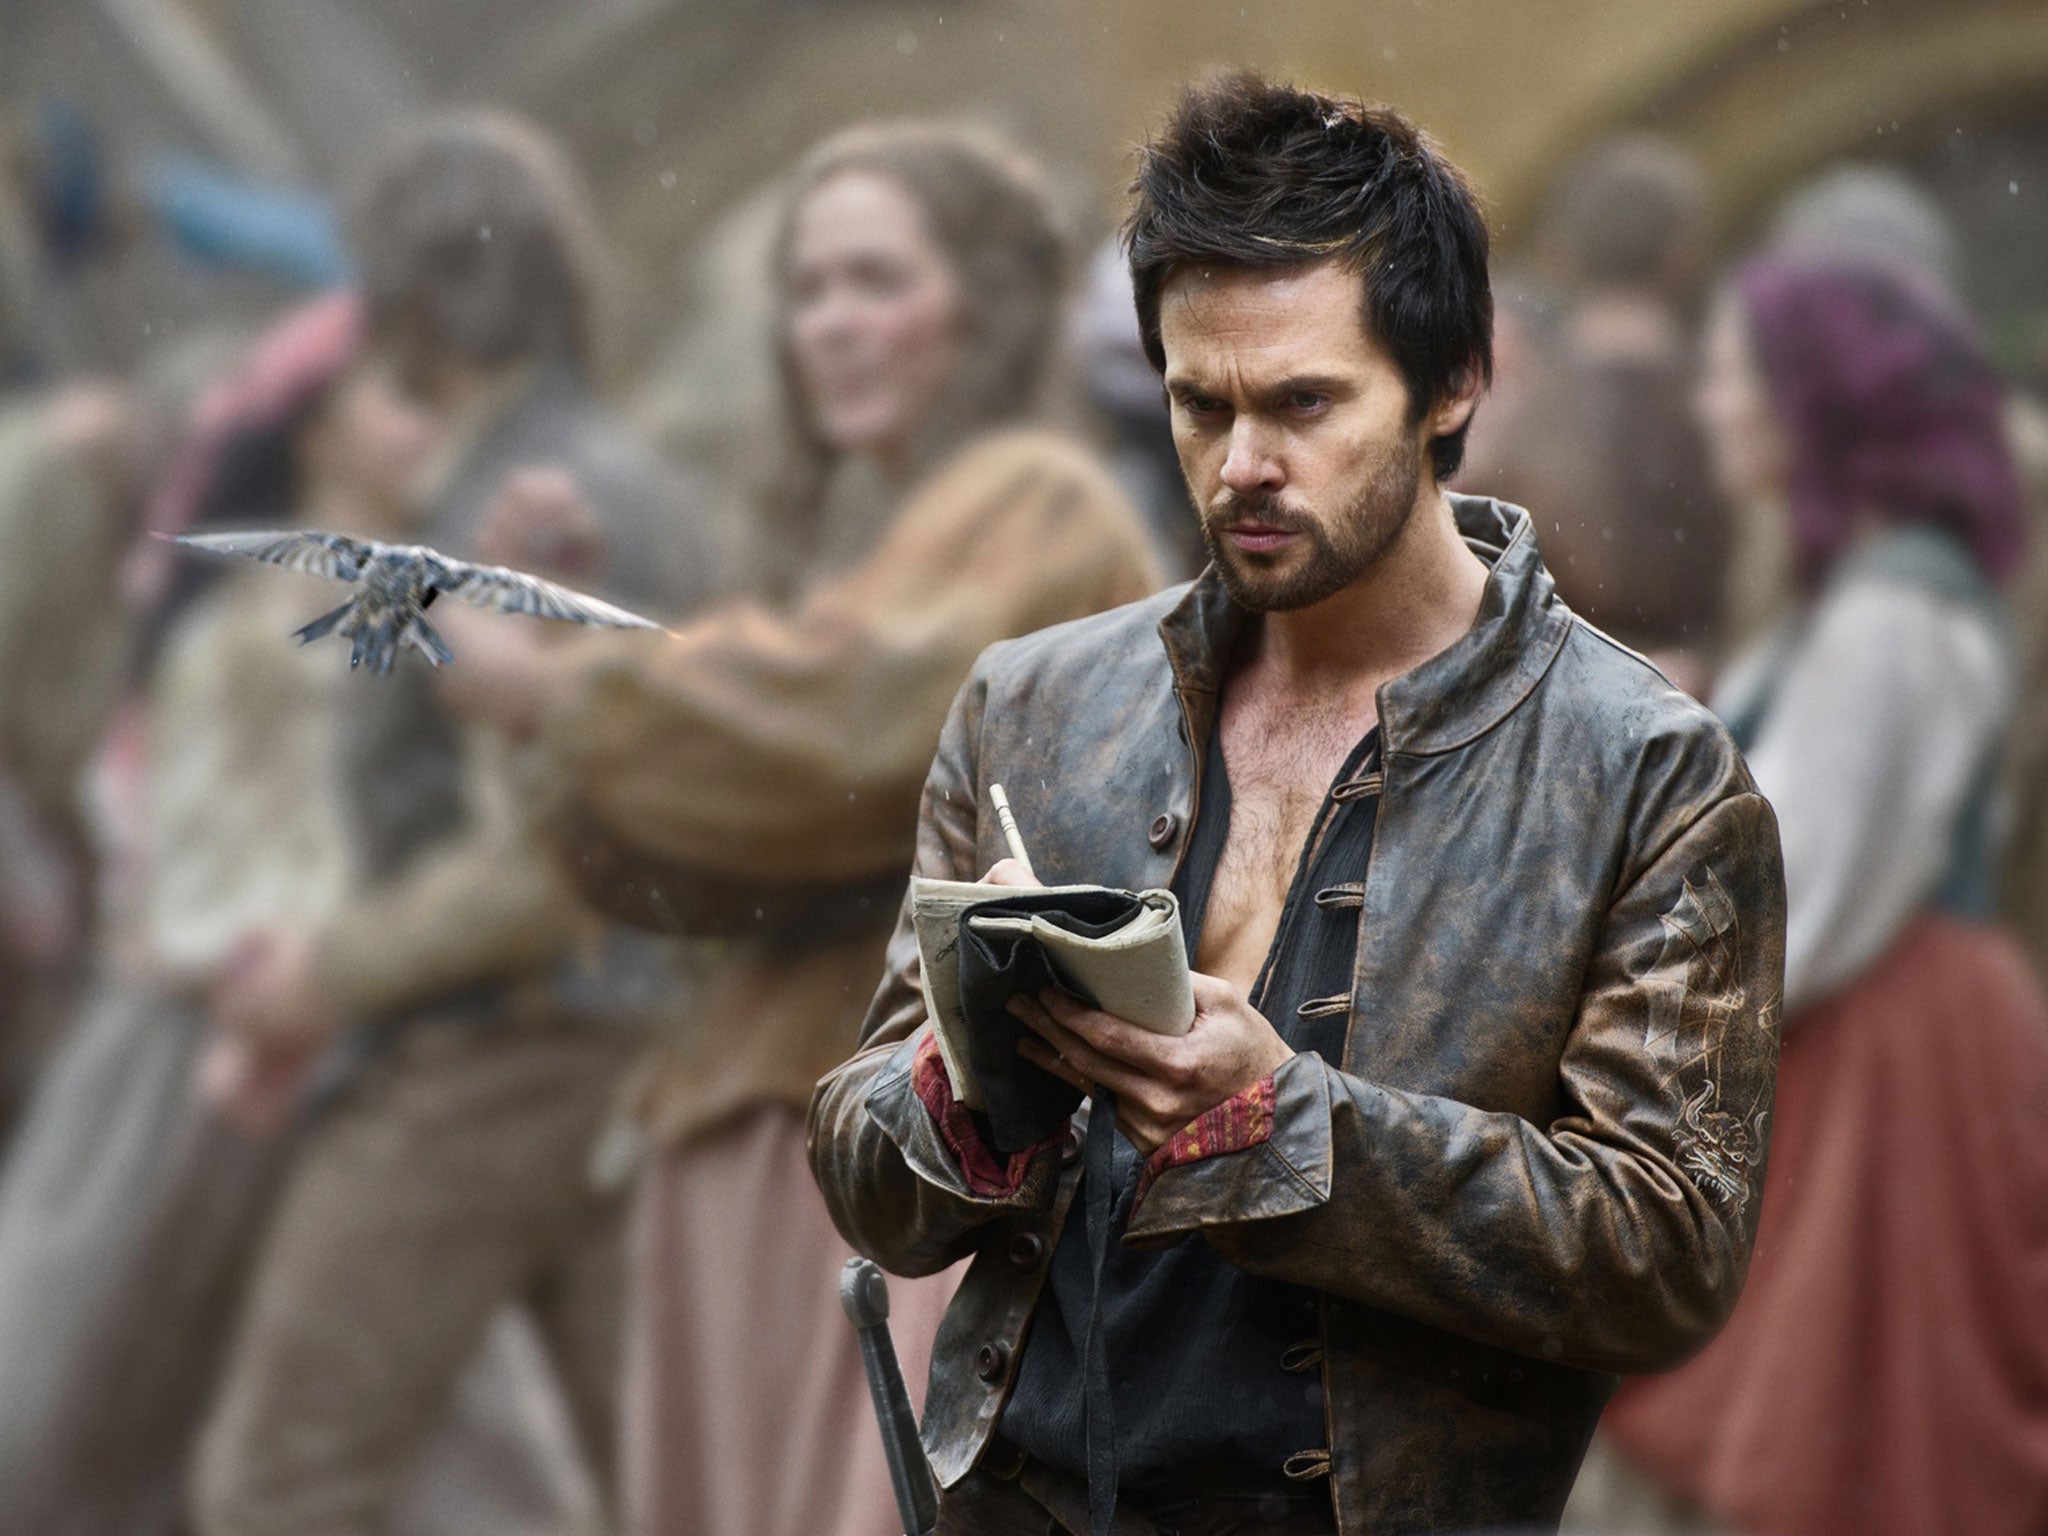 Fly away: Tom Riley plays a young Leonardo embroiled in intrigue